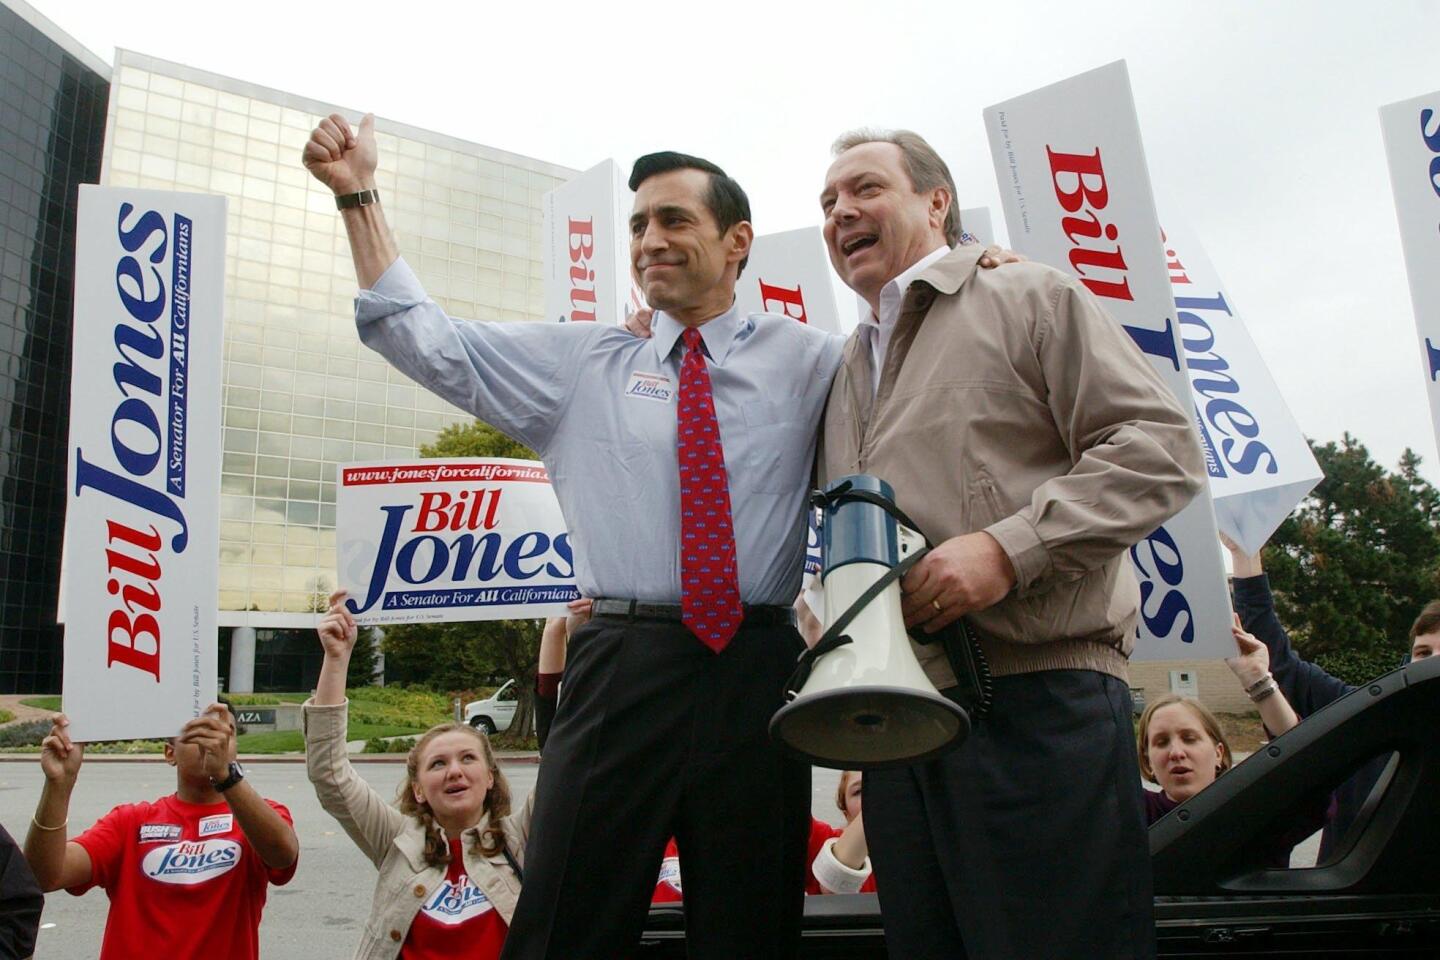 Campaigning for Jones in 2004